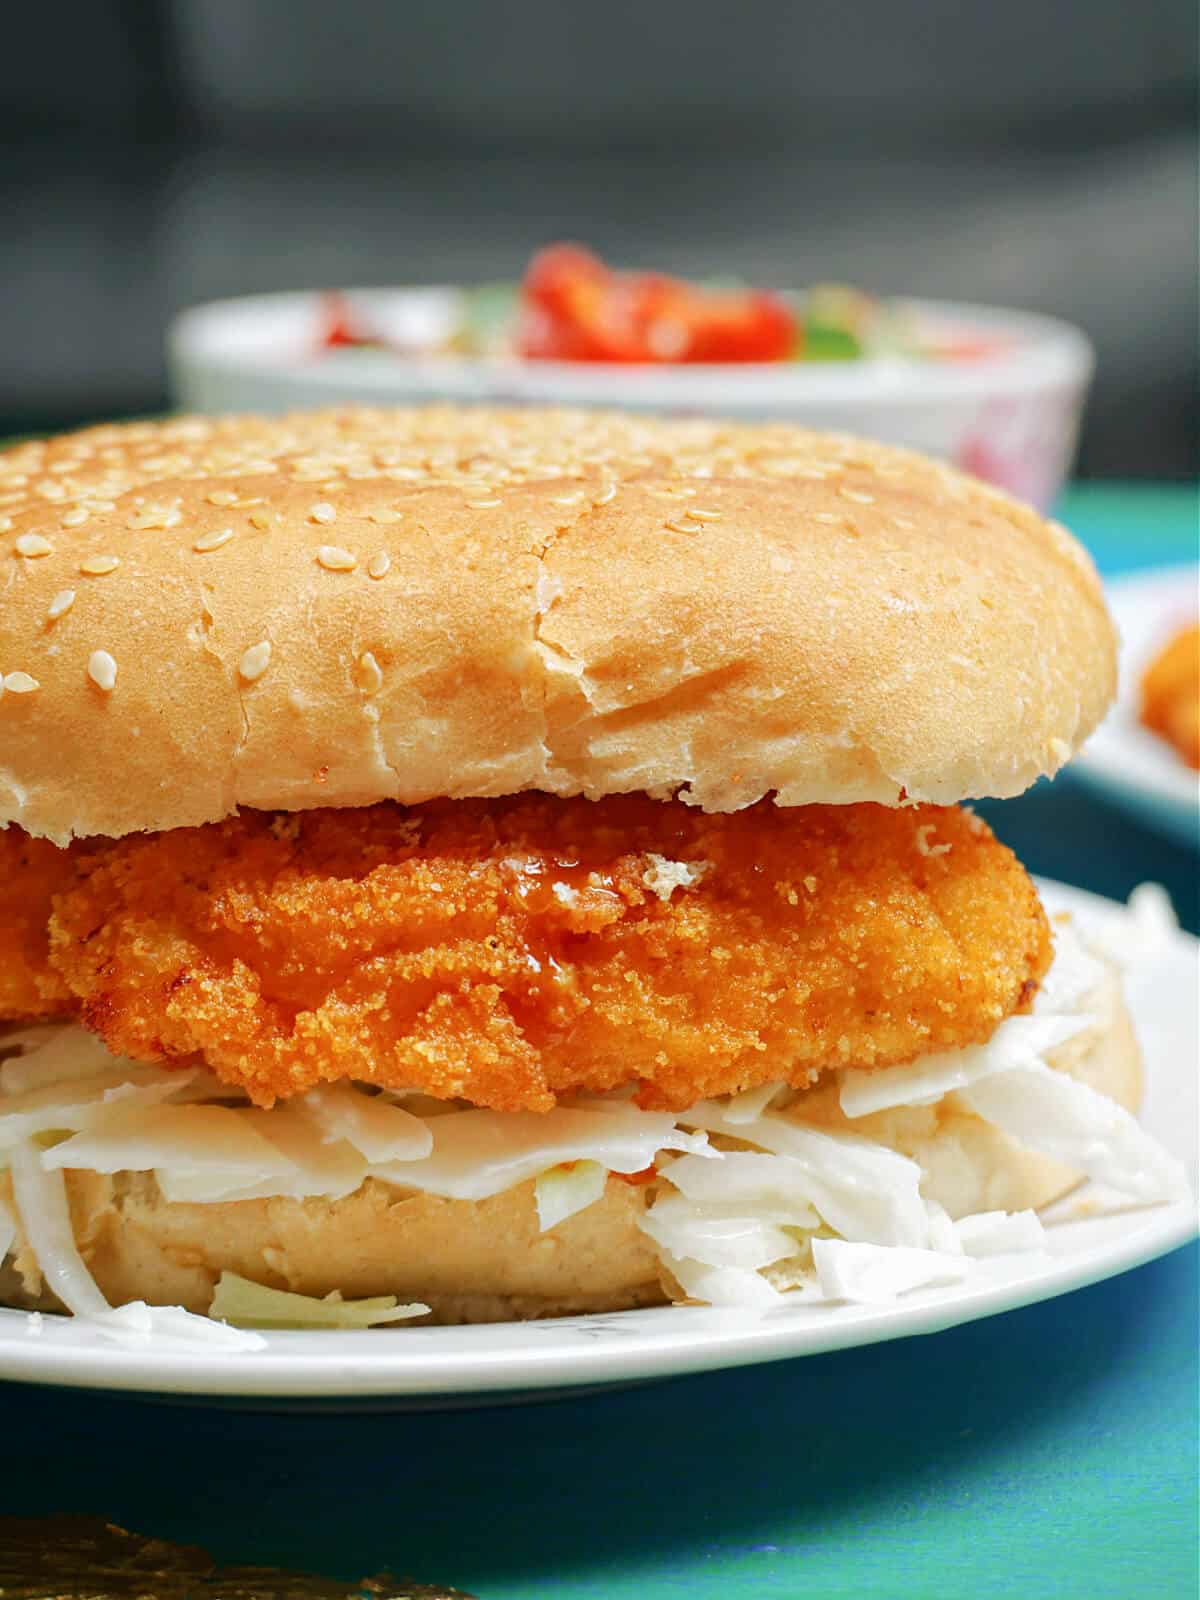 A chicken burger on a white plate